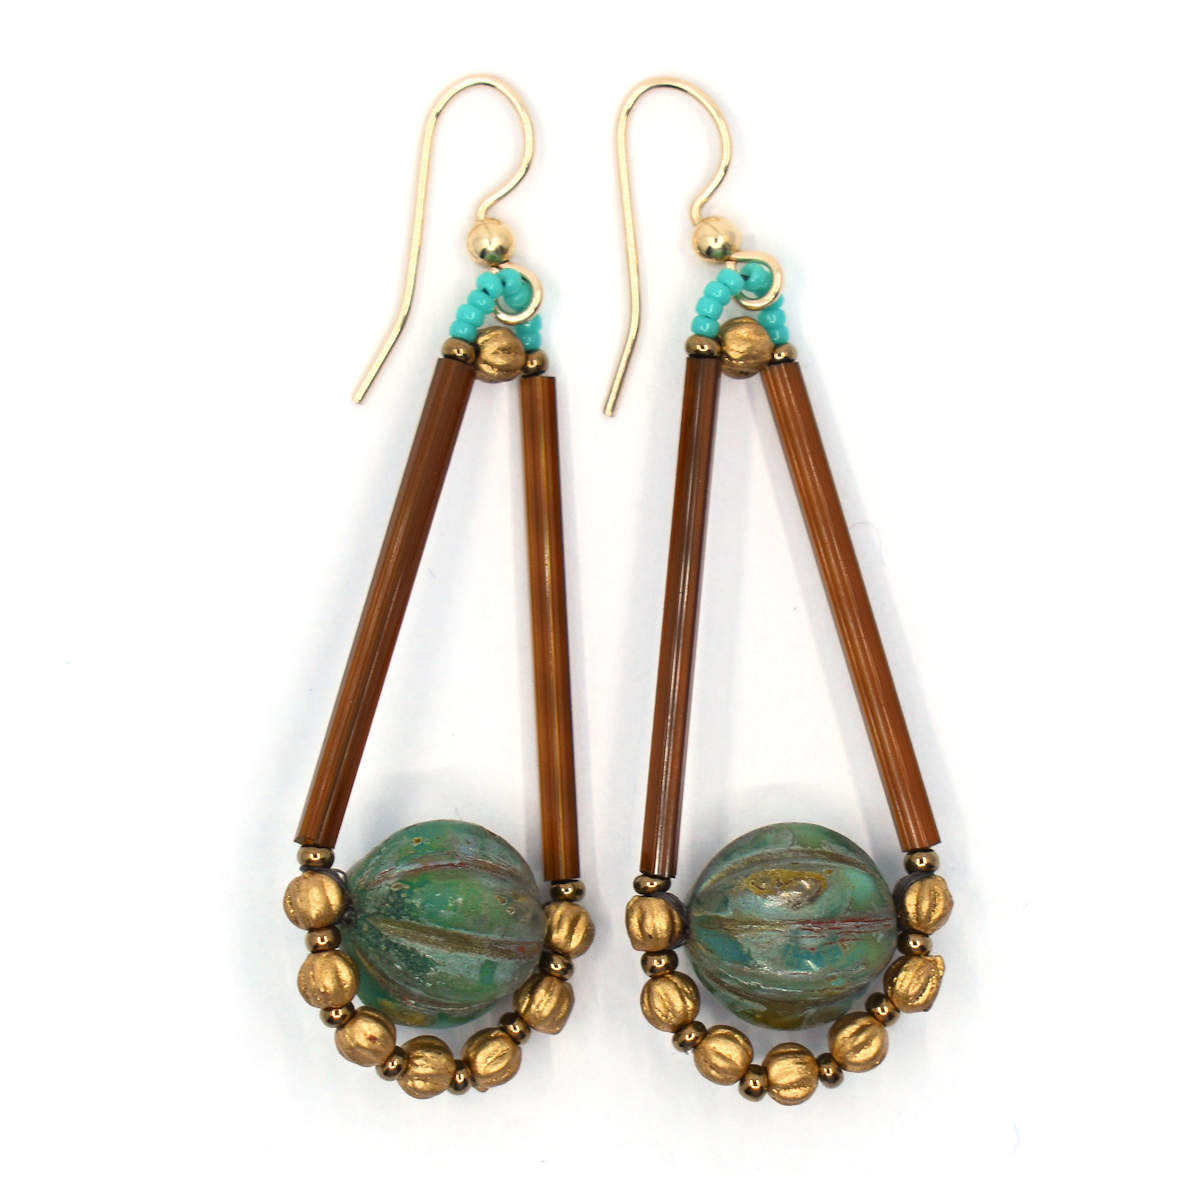 Long narrow earrings with a brown teardrop outline and an earthy varigated turquoise middle lay on a white background. The earrings have gold ear wires.